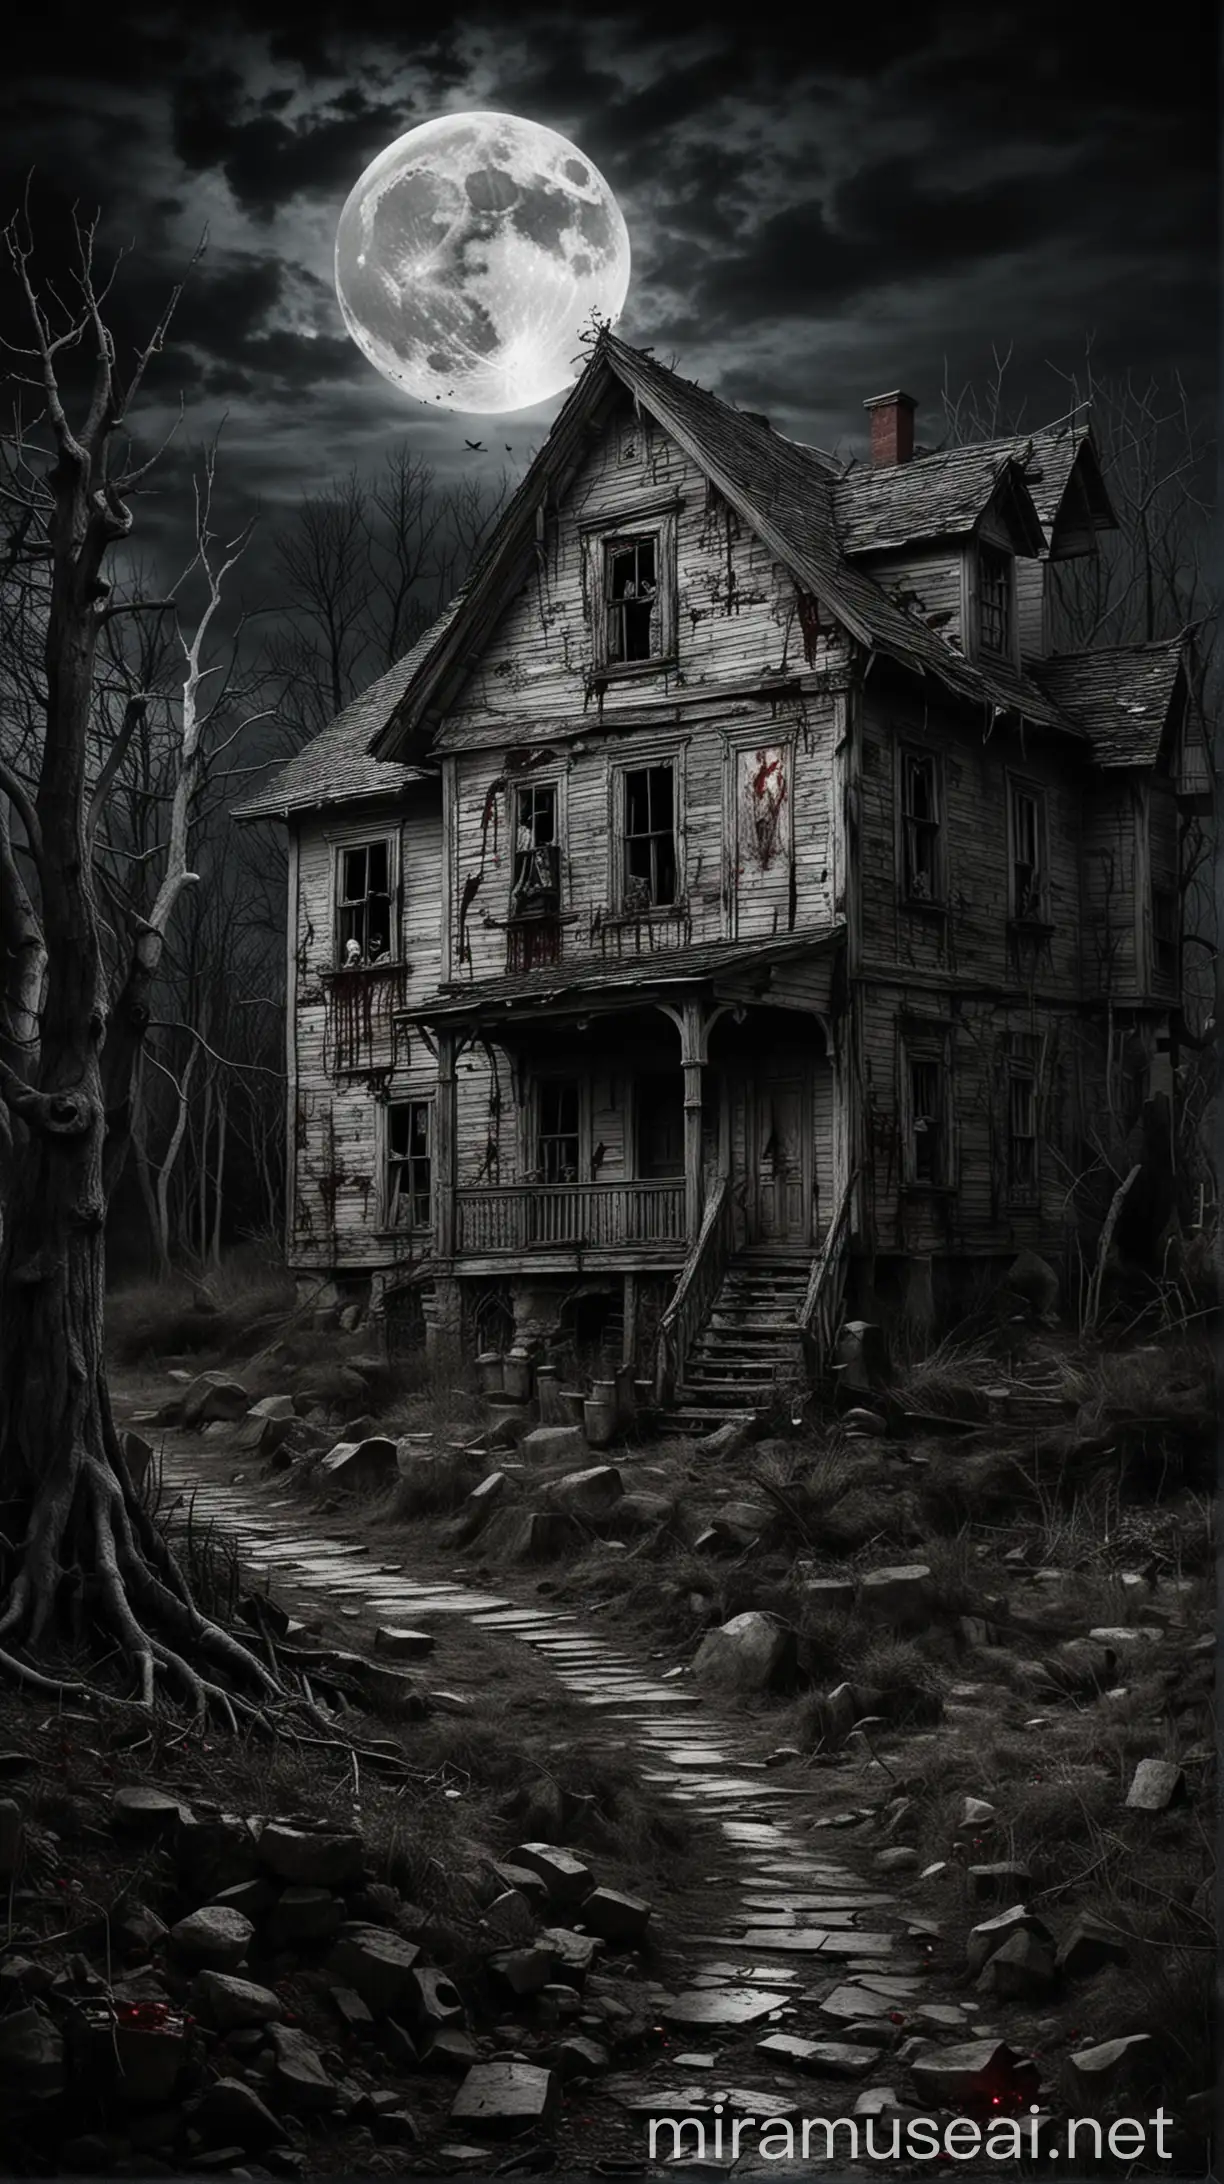 Twilight Ghost Village Sinister Old House and Cursed Spirits